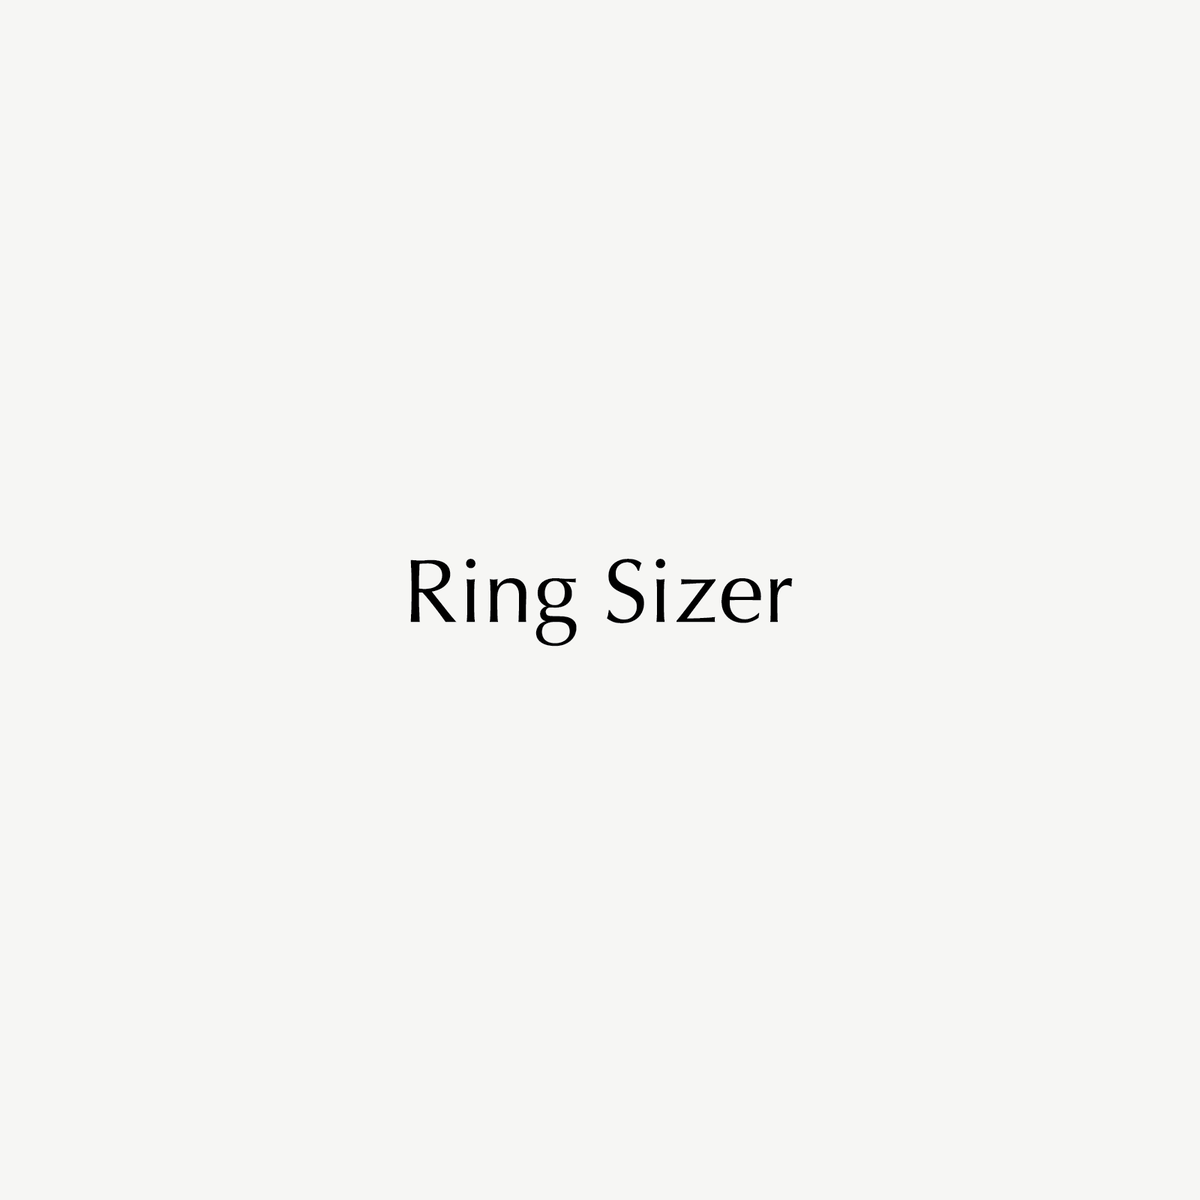 'Ring sizer' text